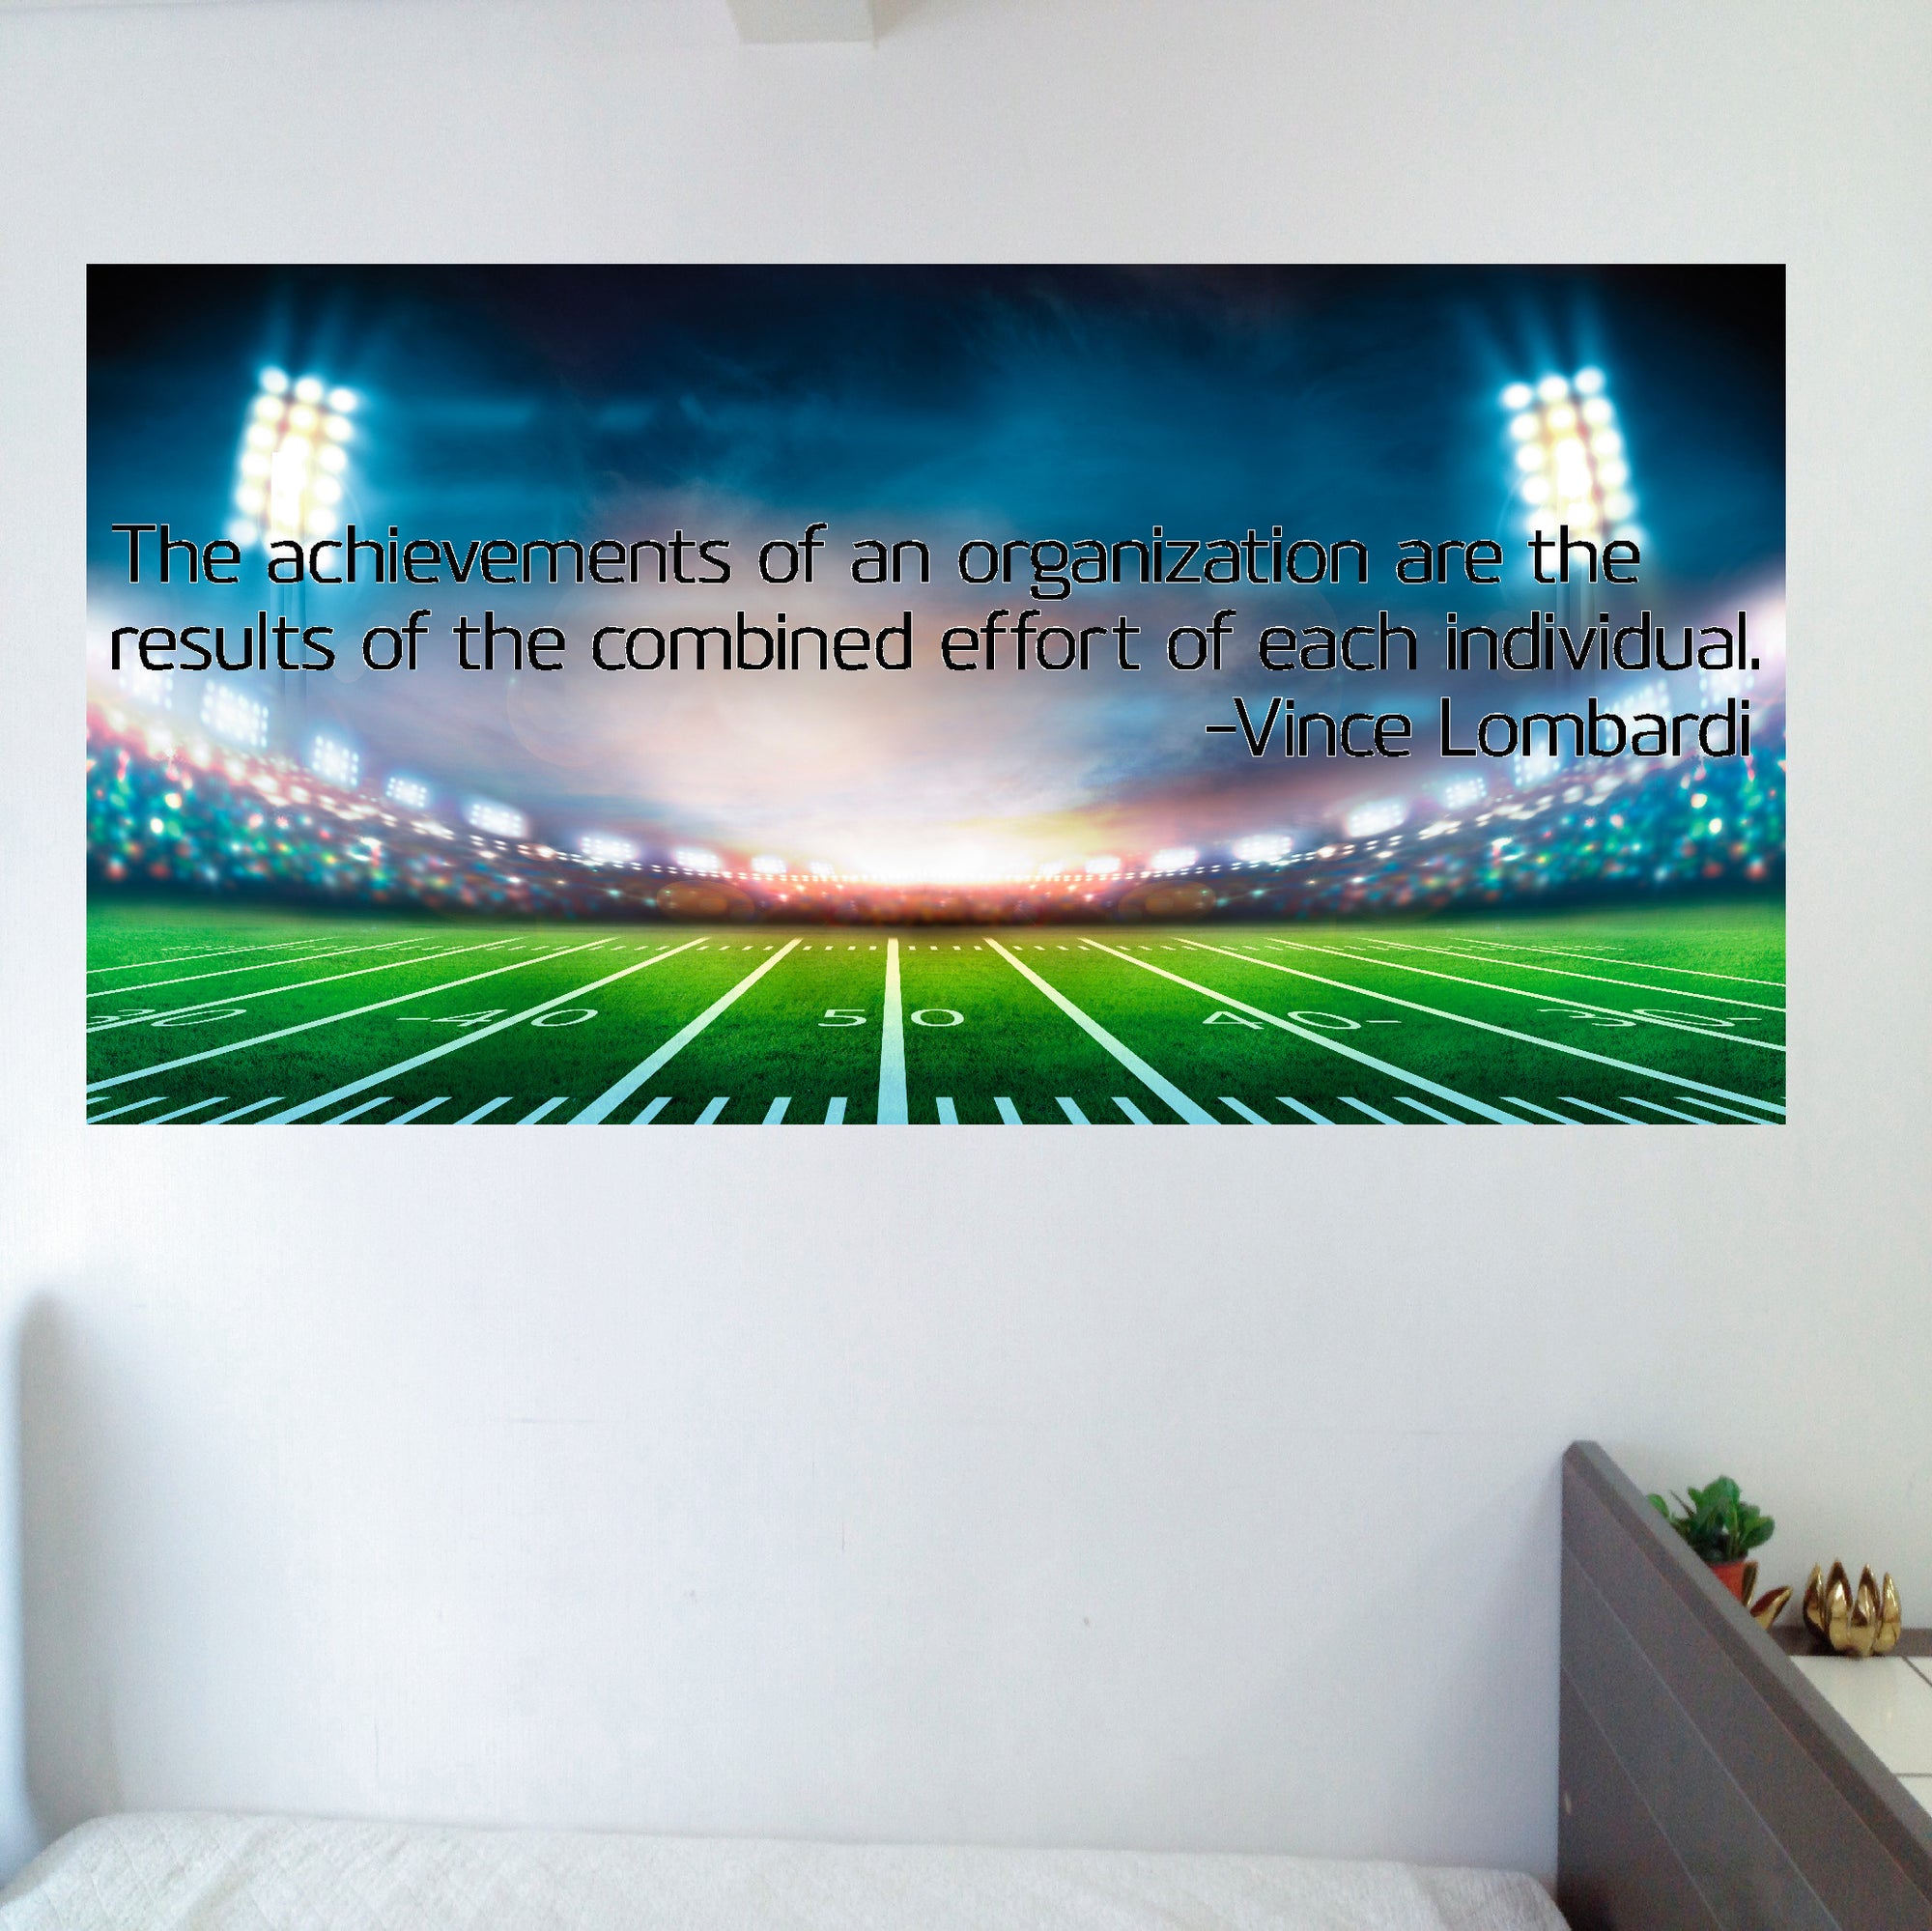 The achievements of an organization Vince Lombardi quote poster